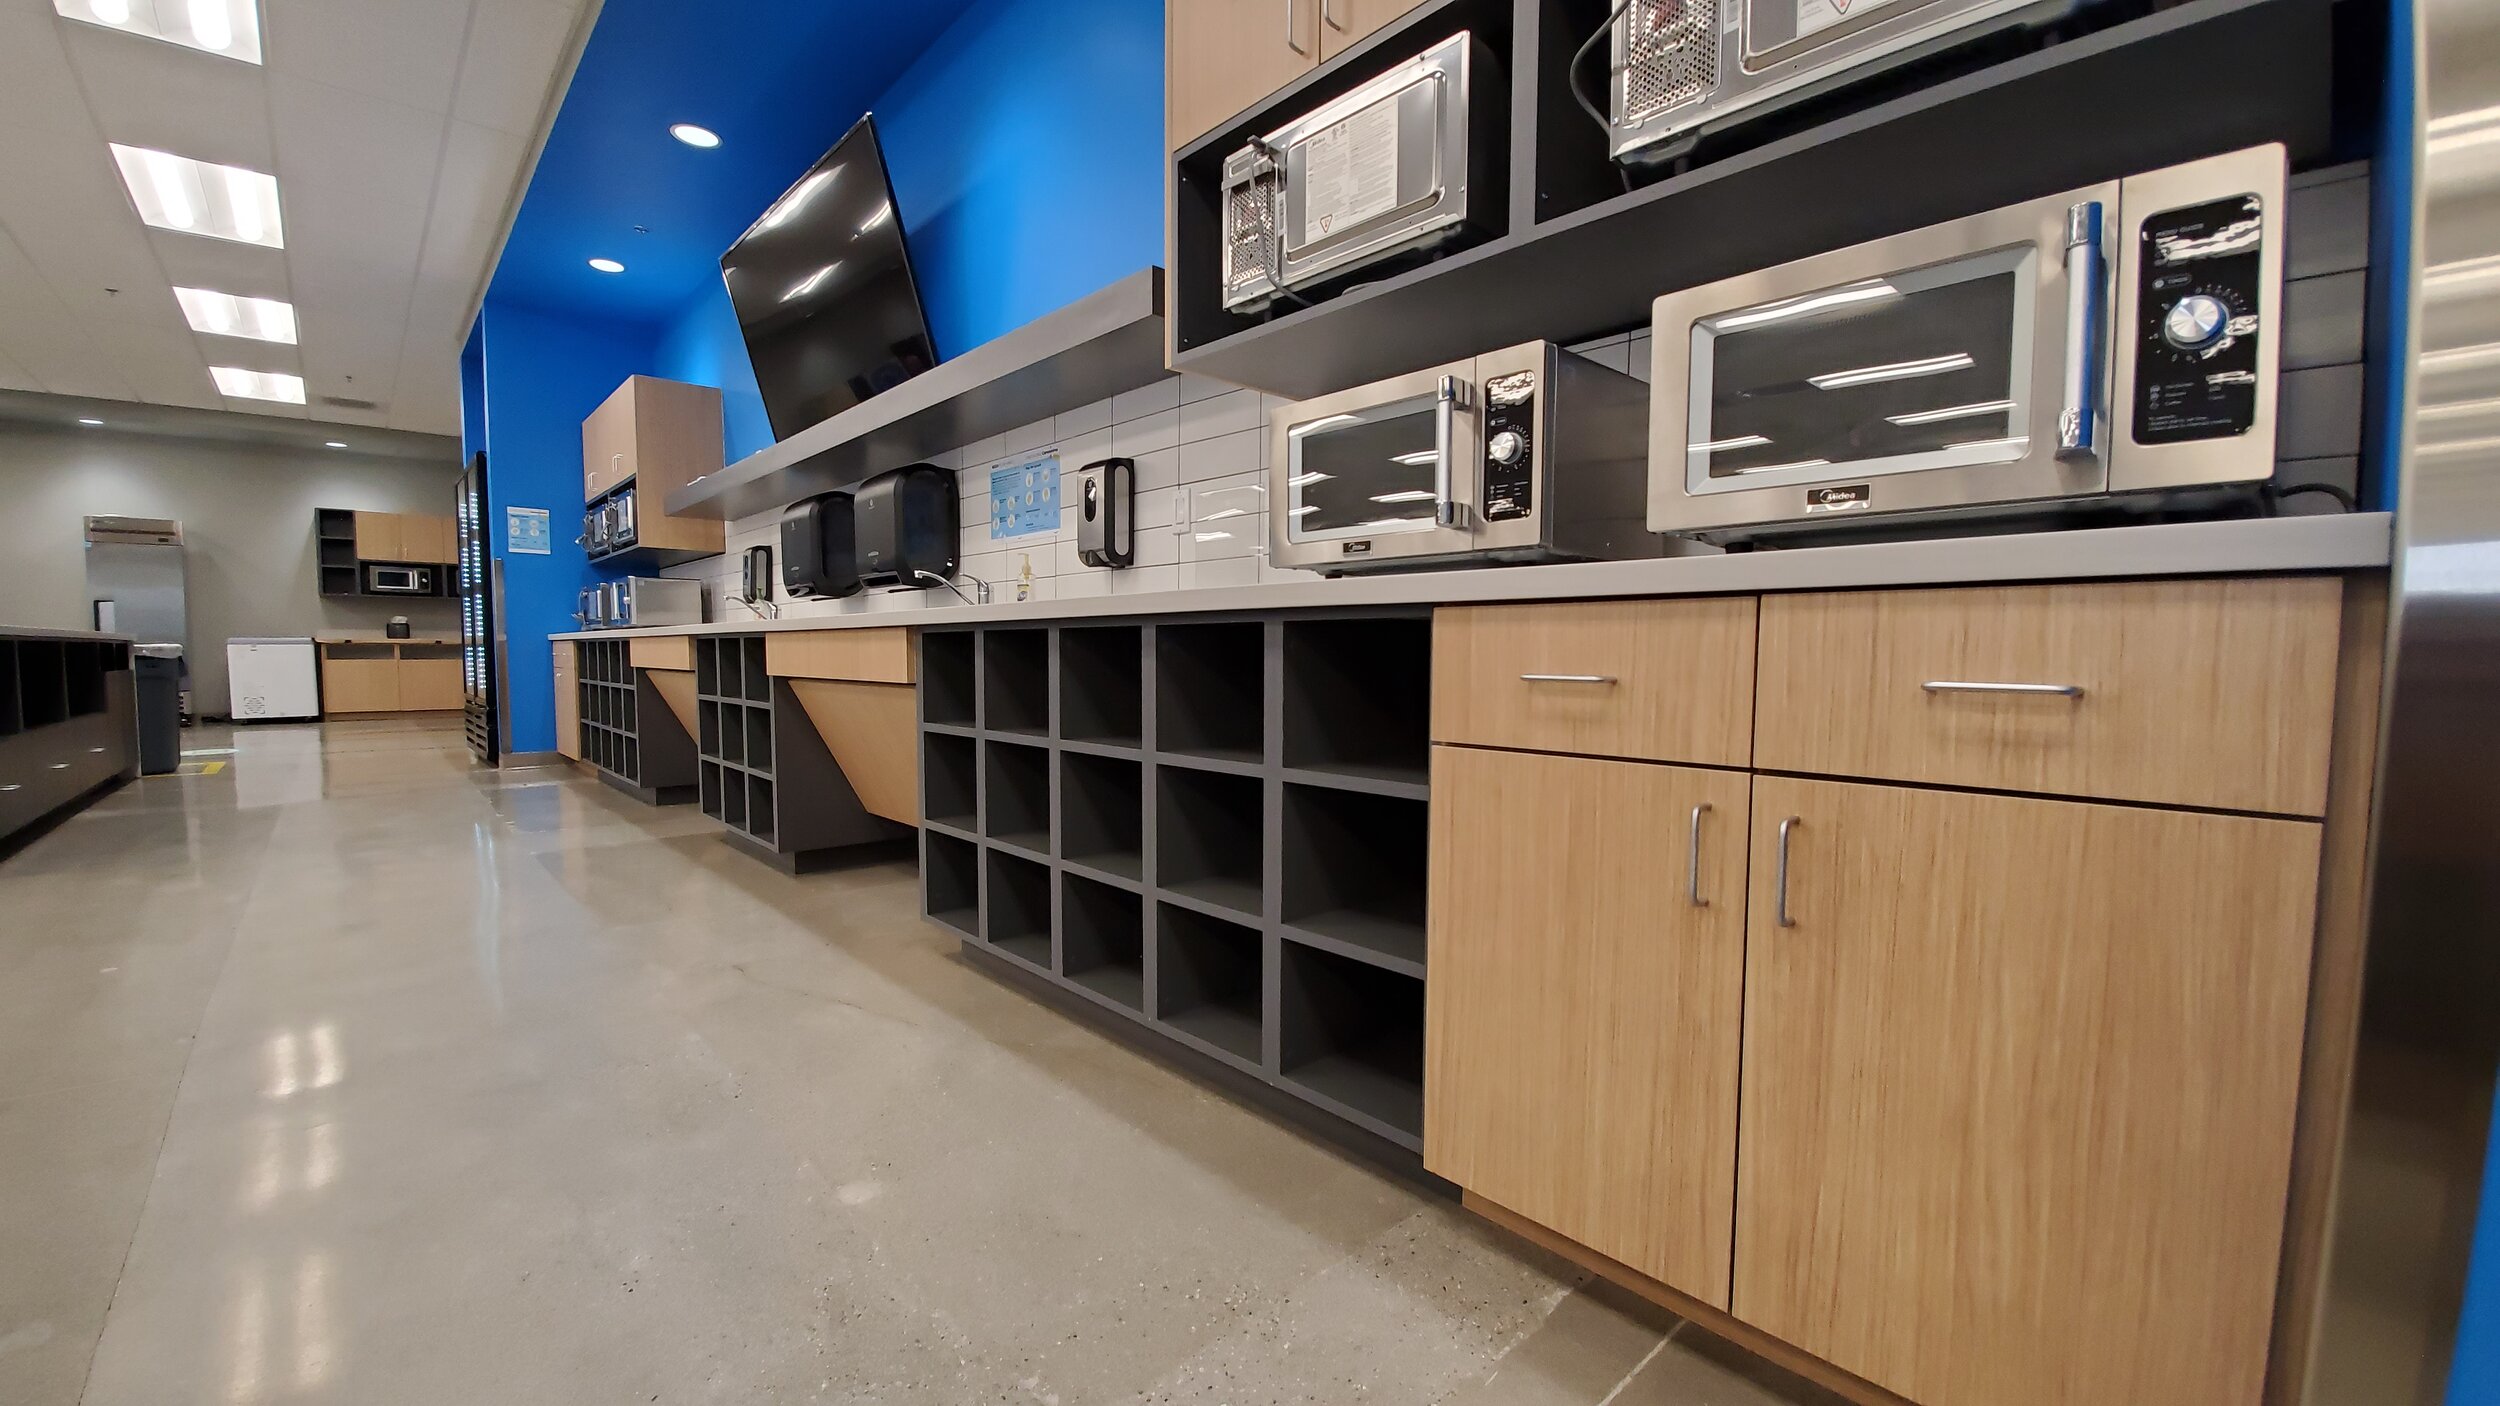 Precision_Custom_Cabinets_San_Diego_Commercial_Cabinetry_Amazon_Warehouse_Breakroom 28.jpg